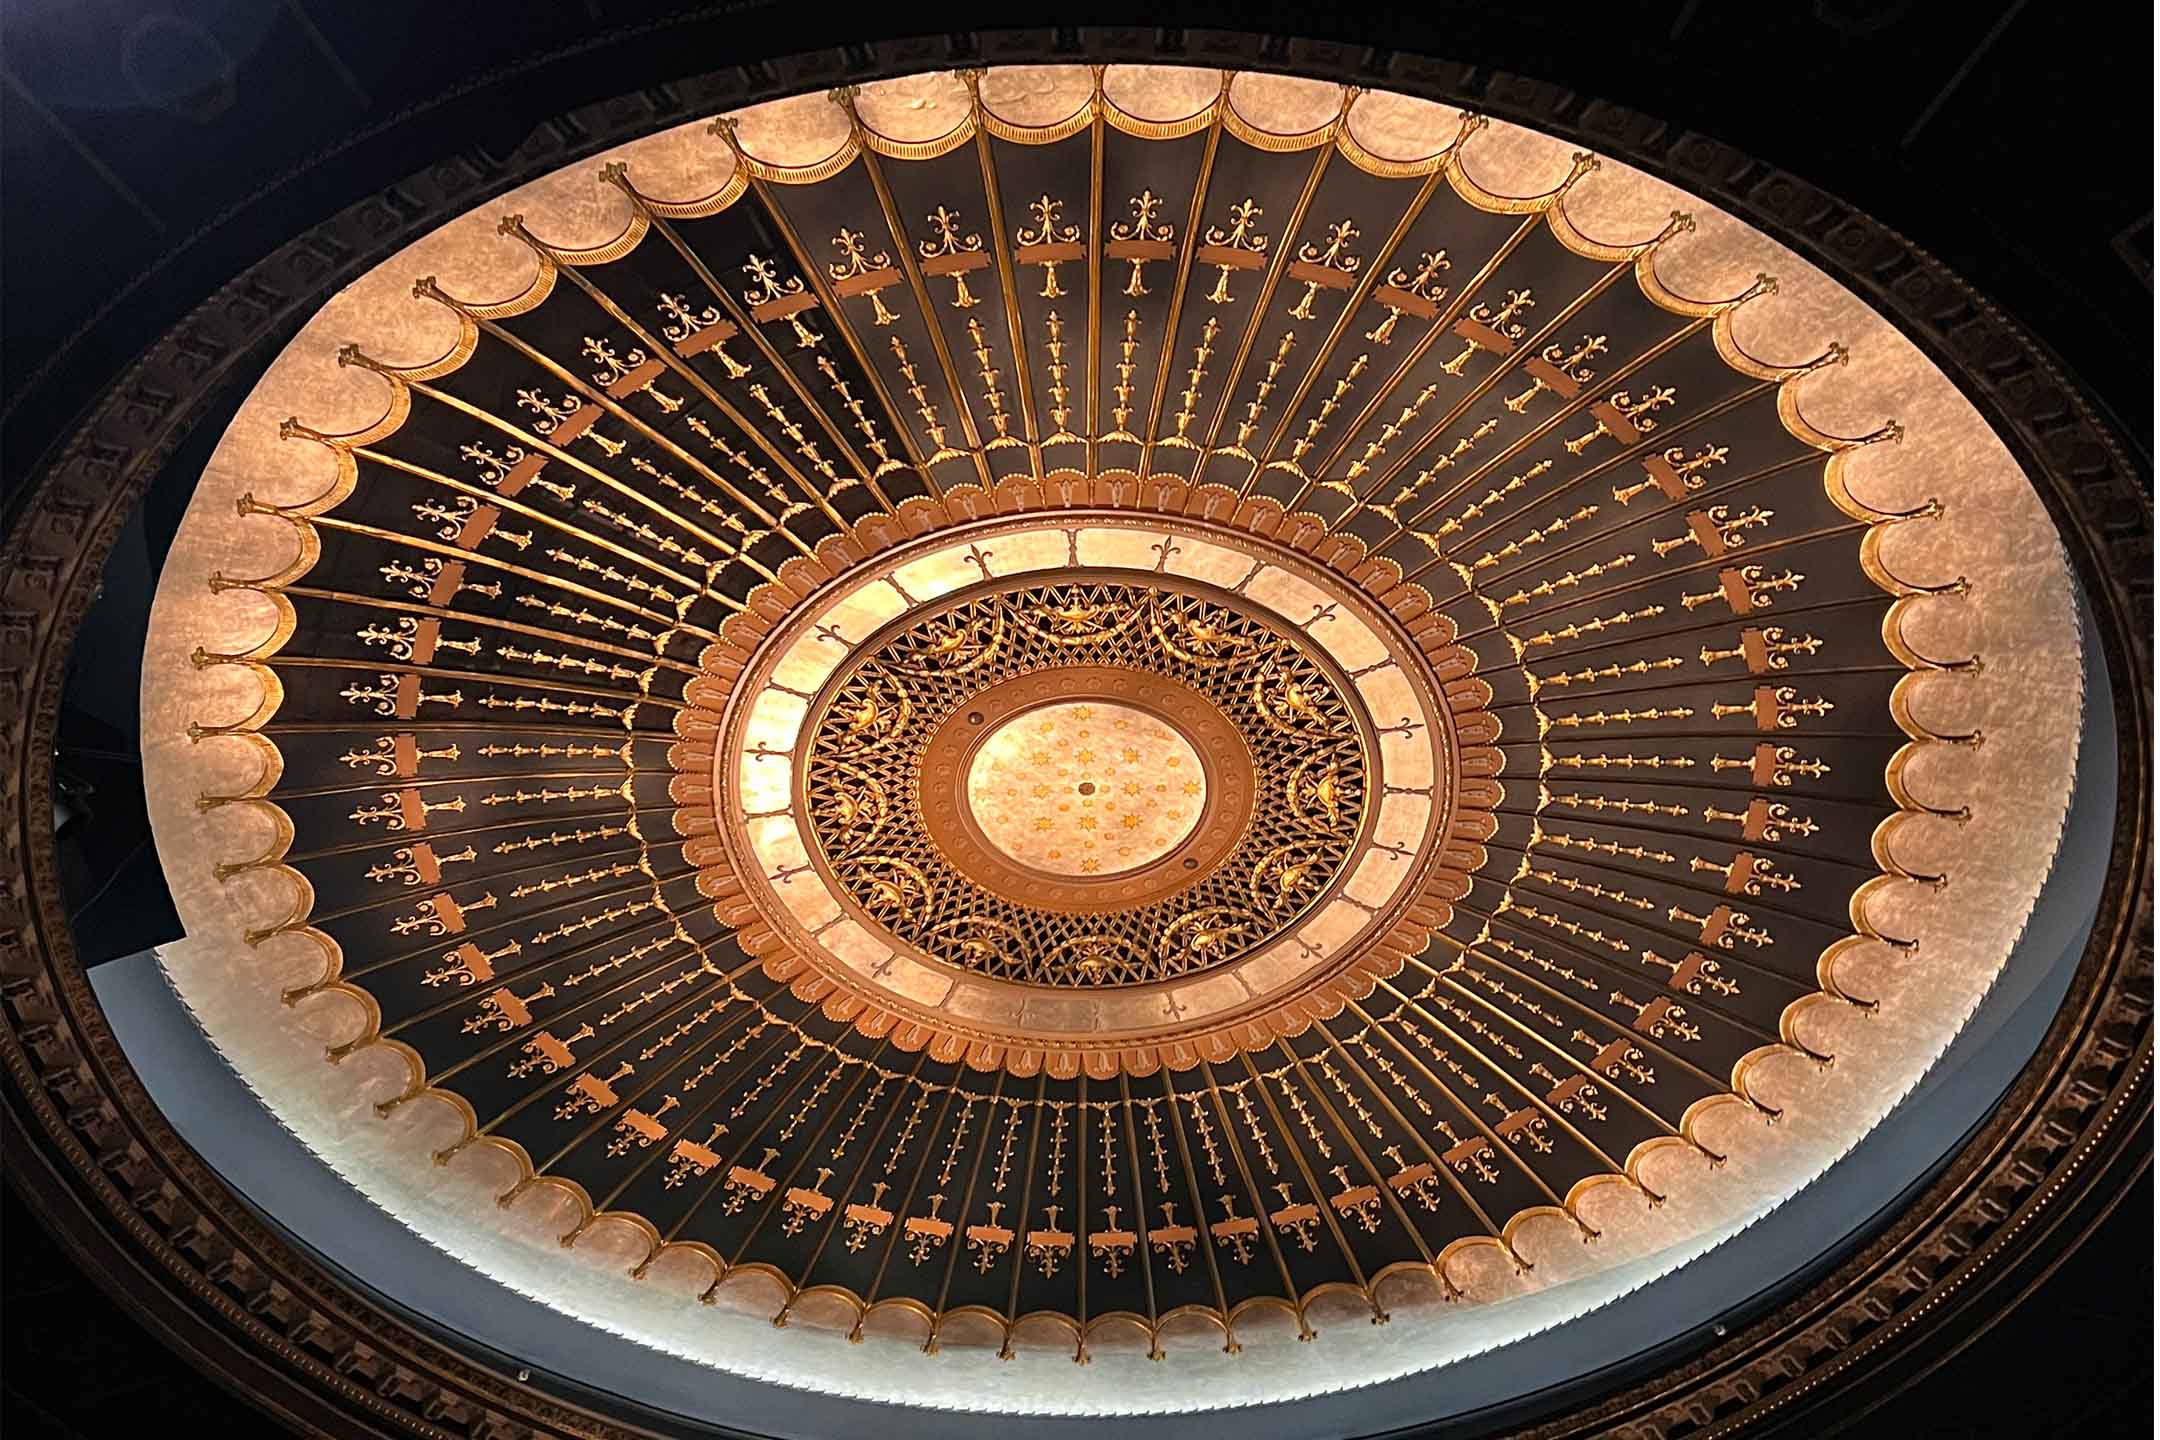 A mandala architectural structure on the ceiling of Mirvish Theatre in Toronto, Canada